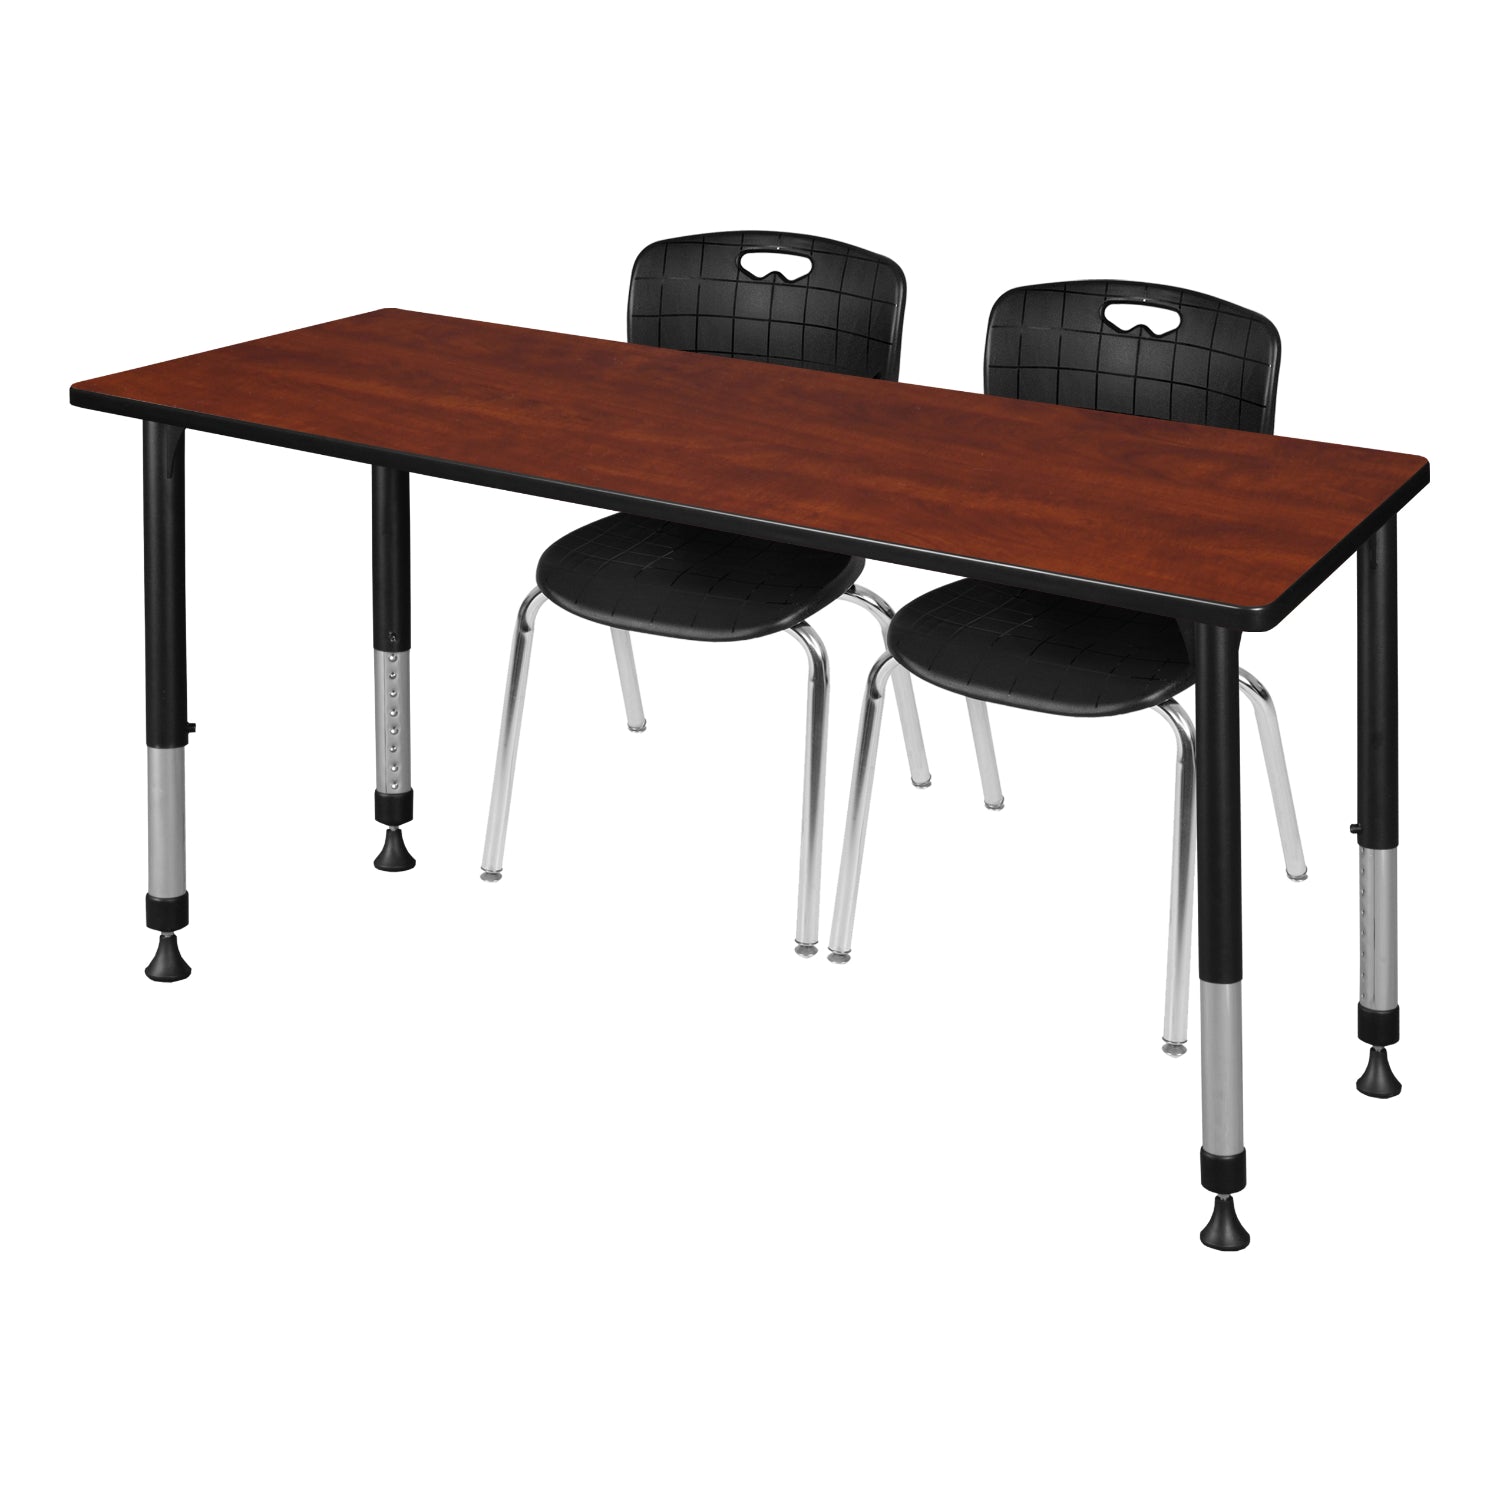 Kee Classroom Table and Chair Package, Kee 60" x 24" Rectangular Adjustable Height Table with 2 Andy 18" Stack Chairs